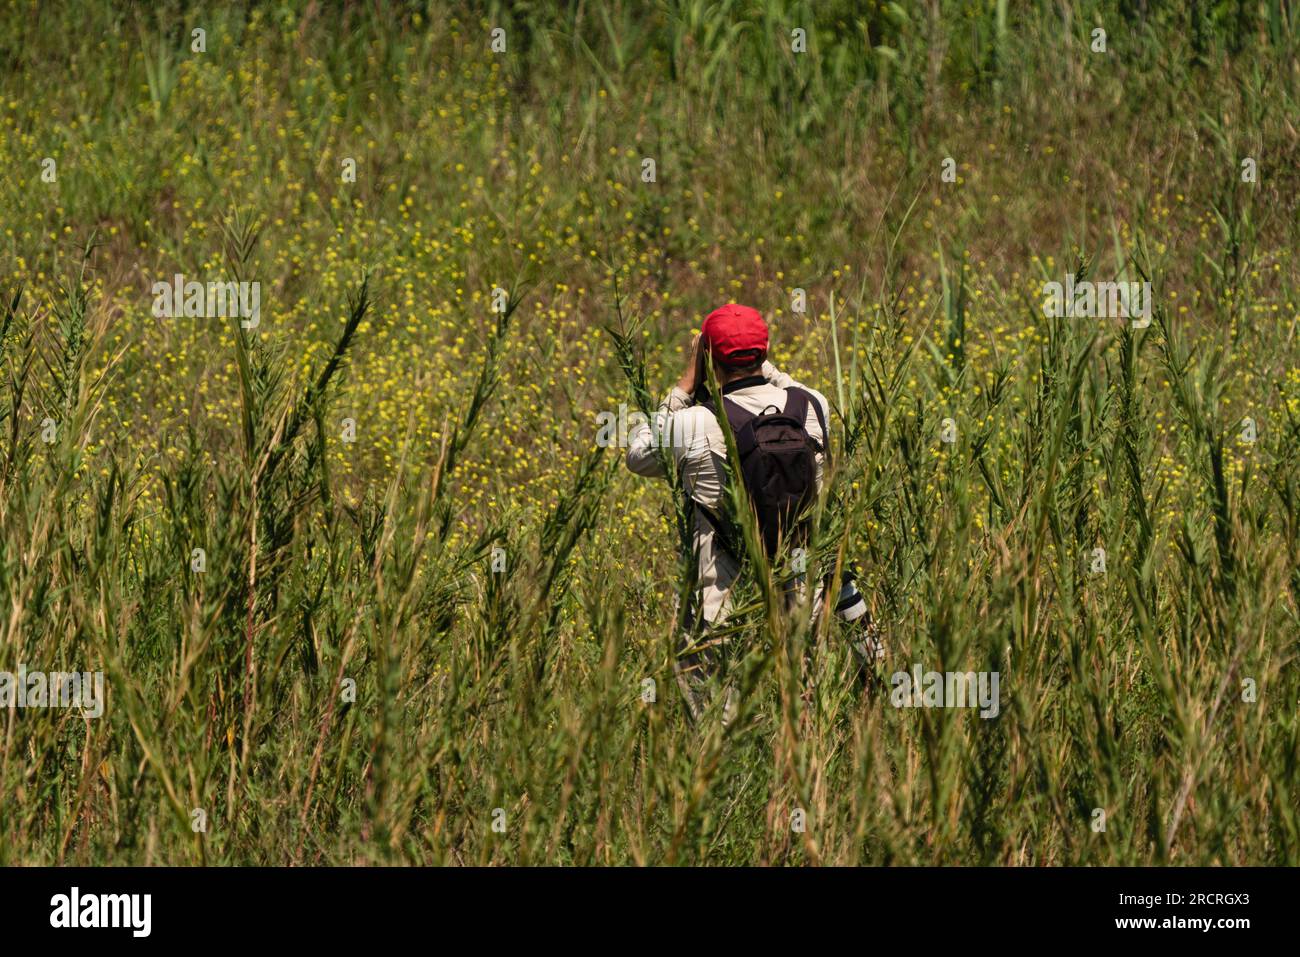 A man observing nature with binoculars Stock Photo